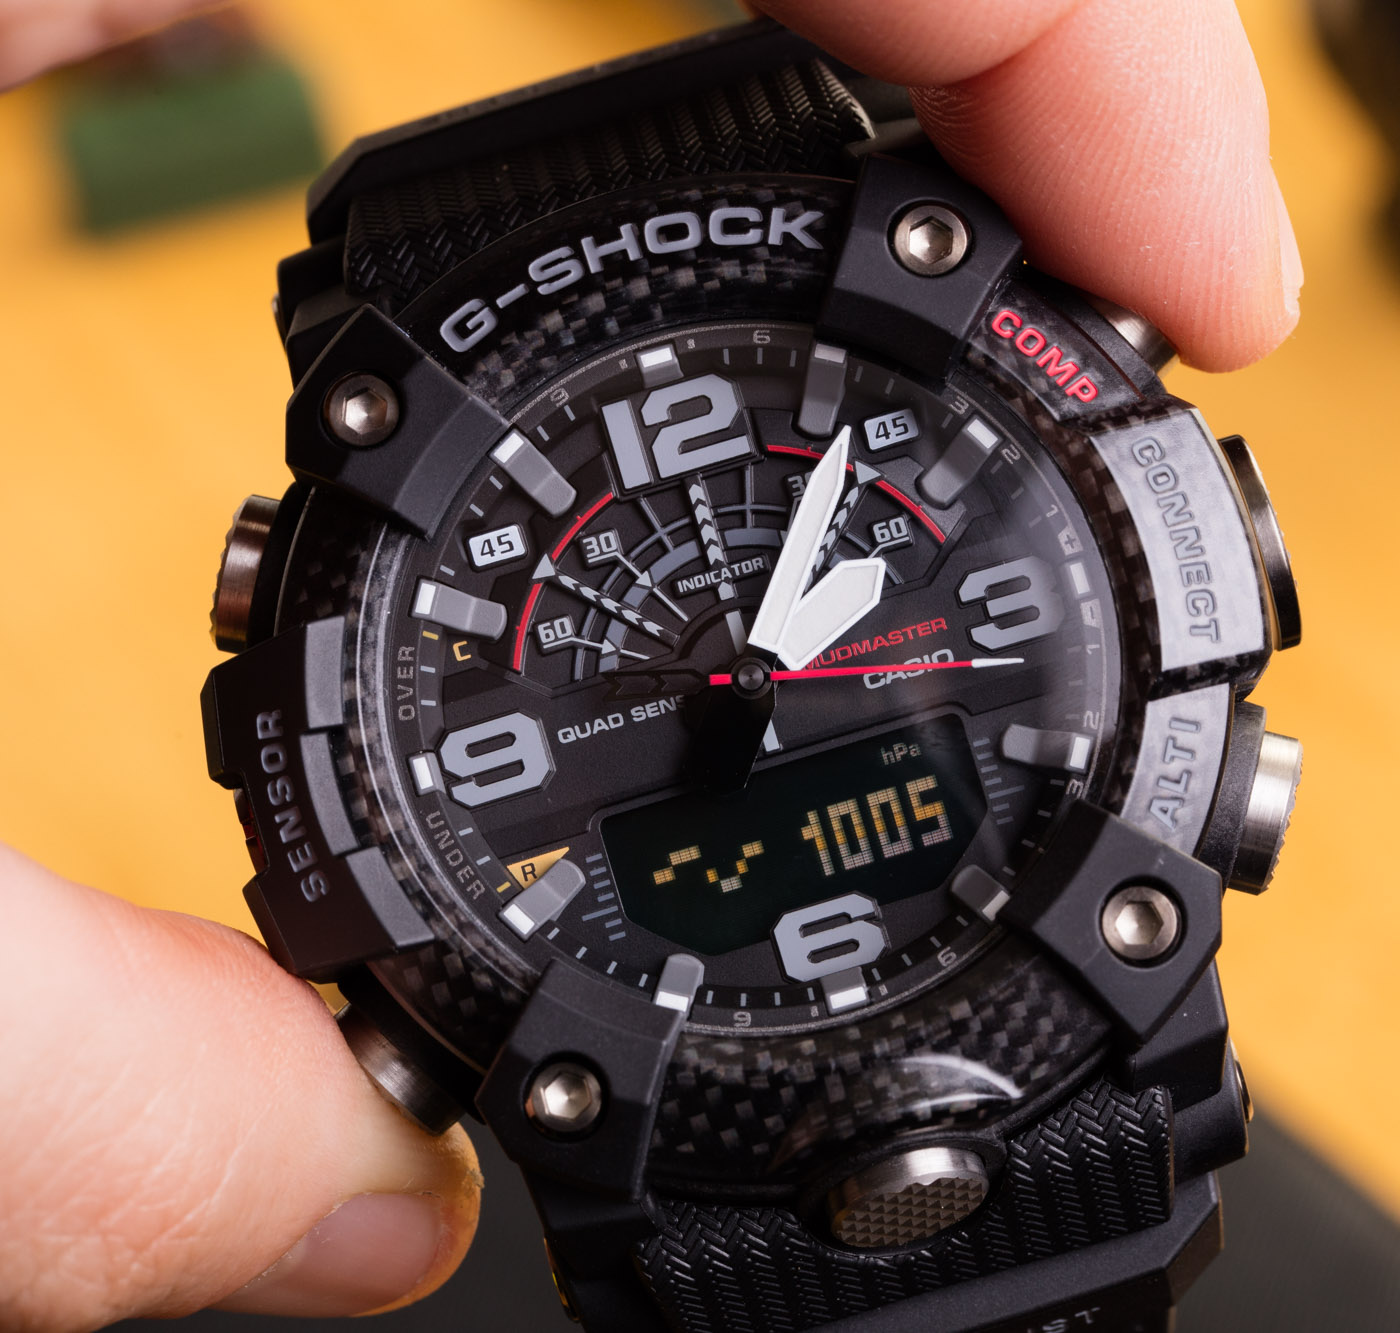 History and facts about the Casio G-Shock Mudmaster collection